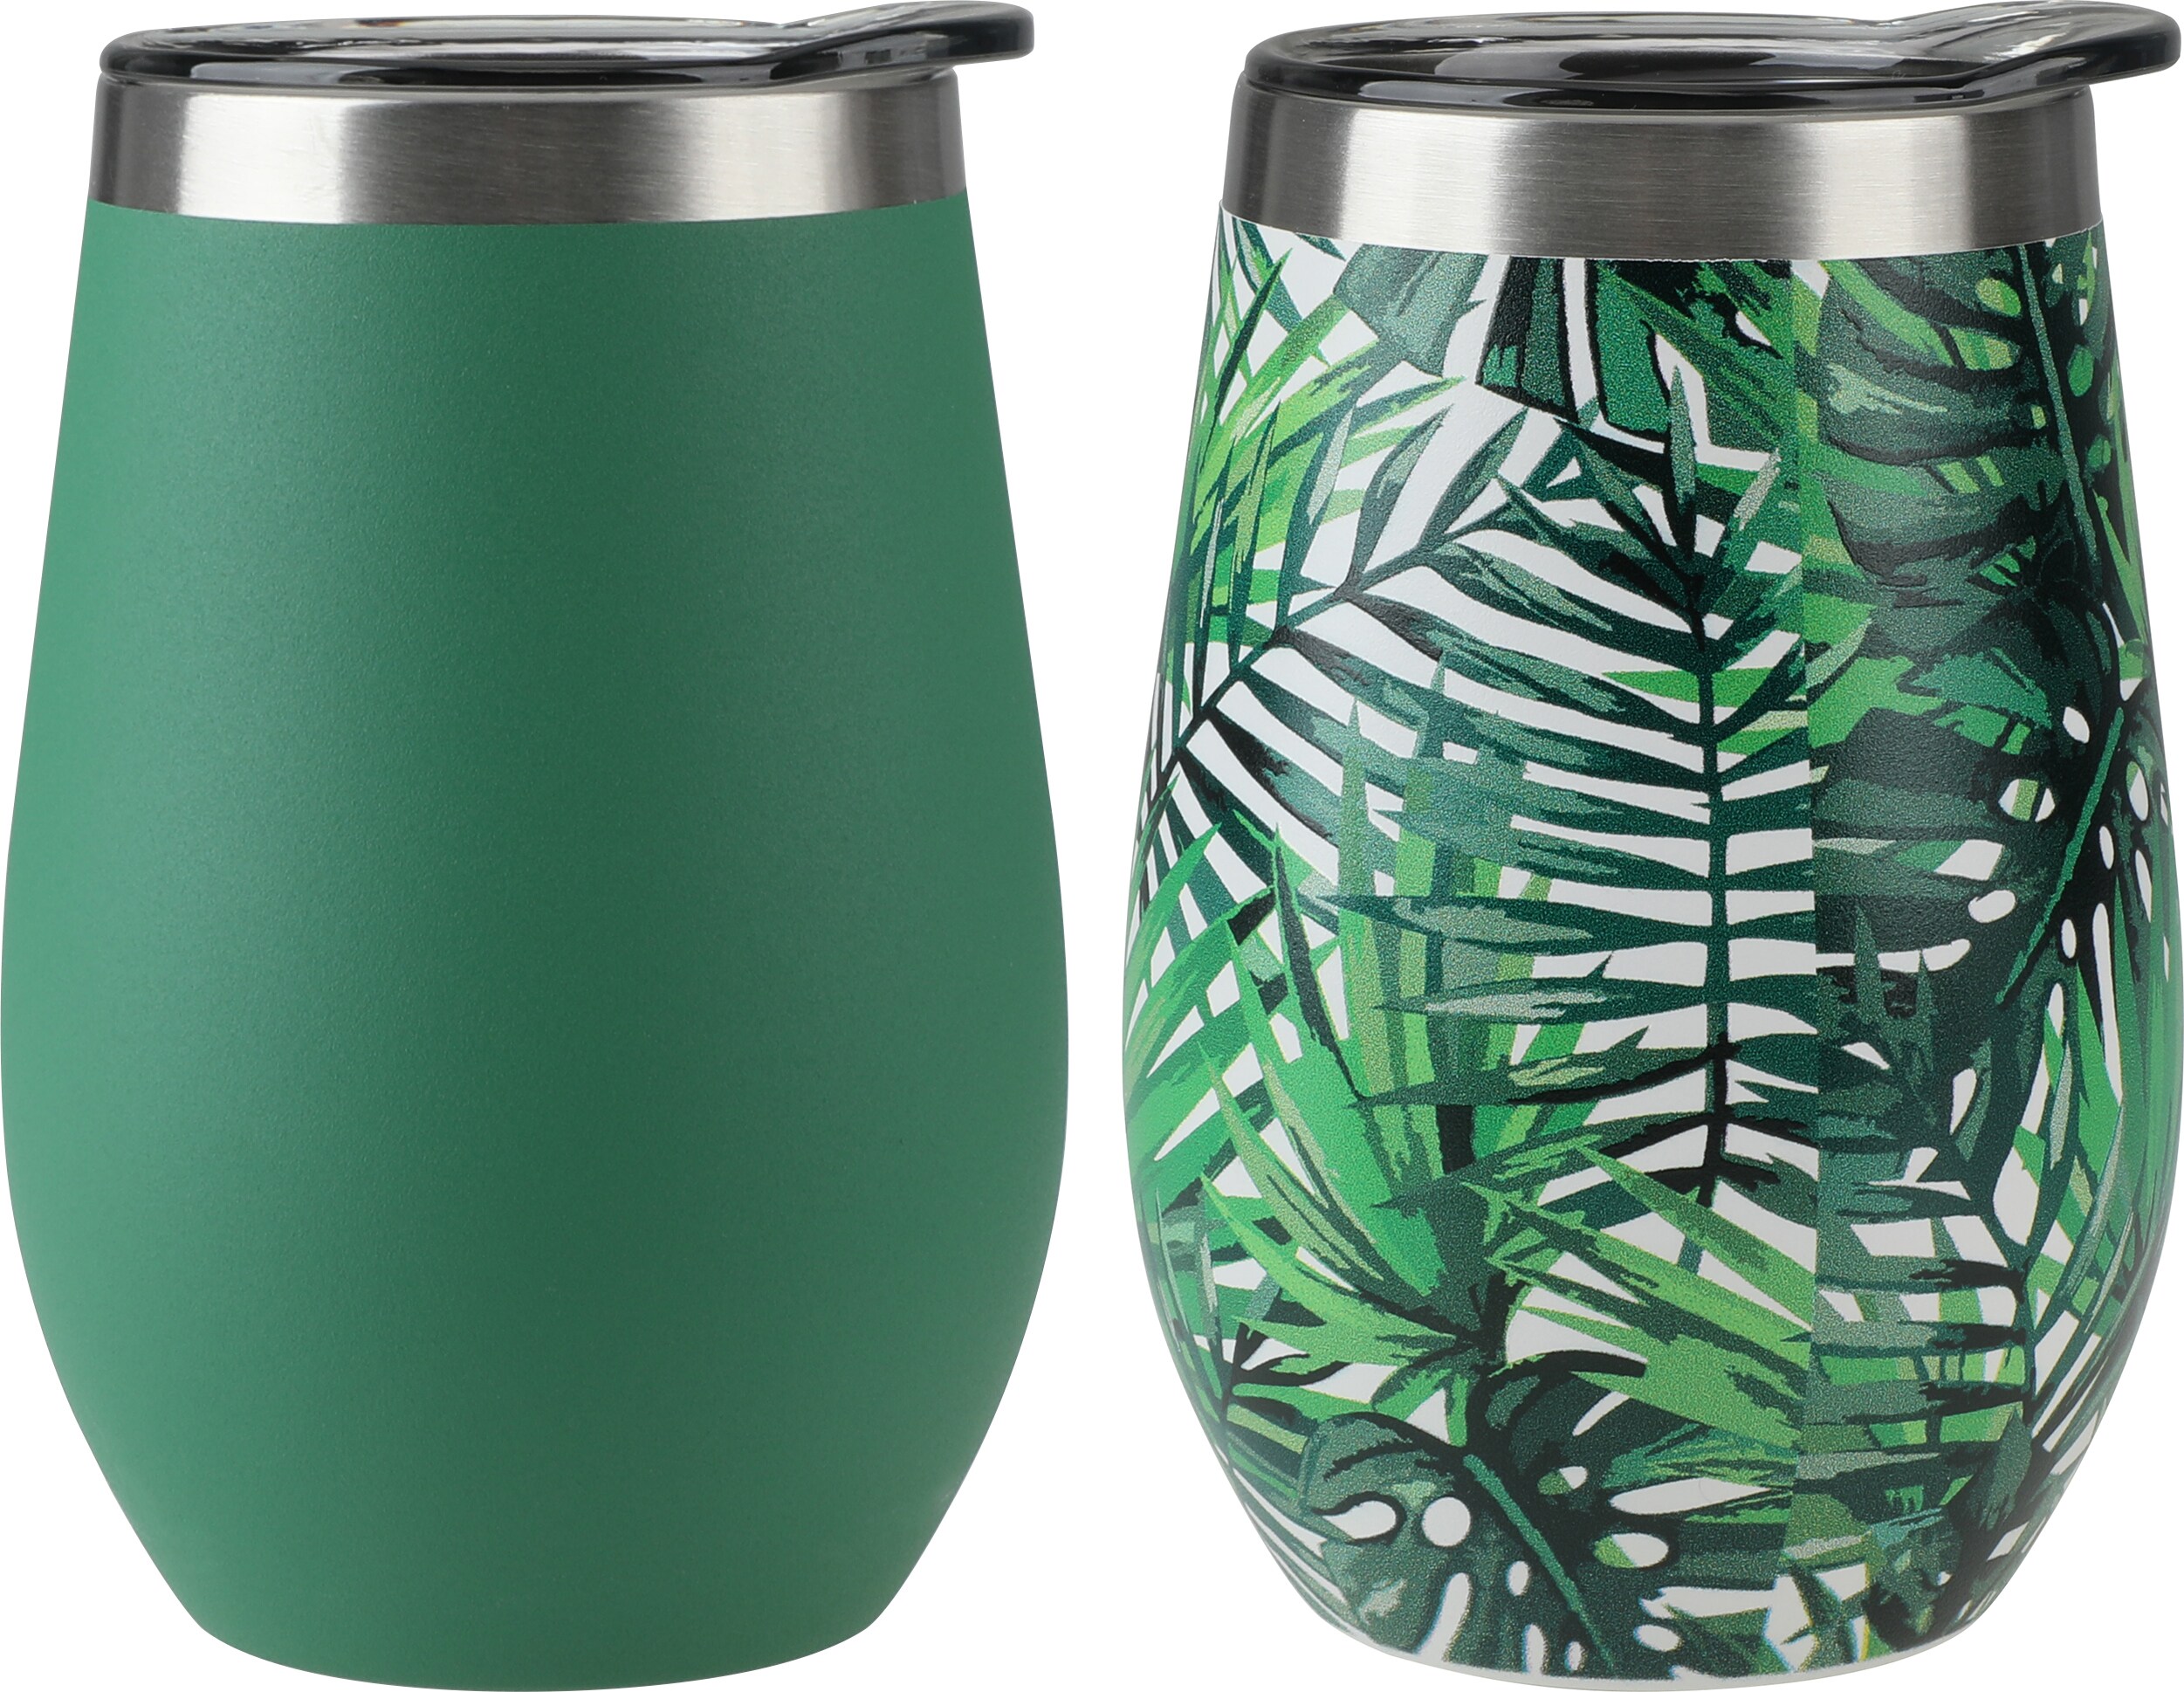 RTIC Wine Tumblers - Stainless Steel, Insulated, Reusable